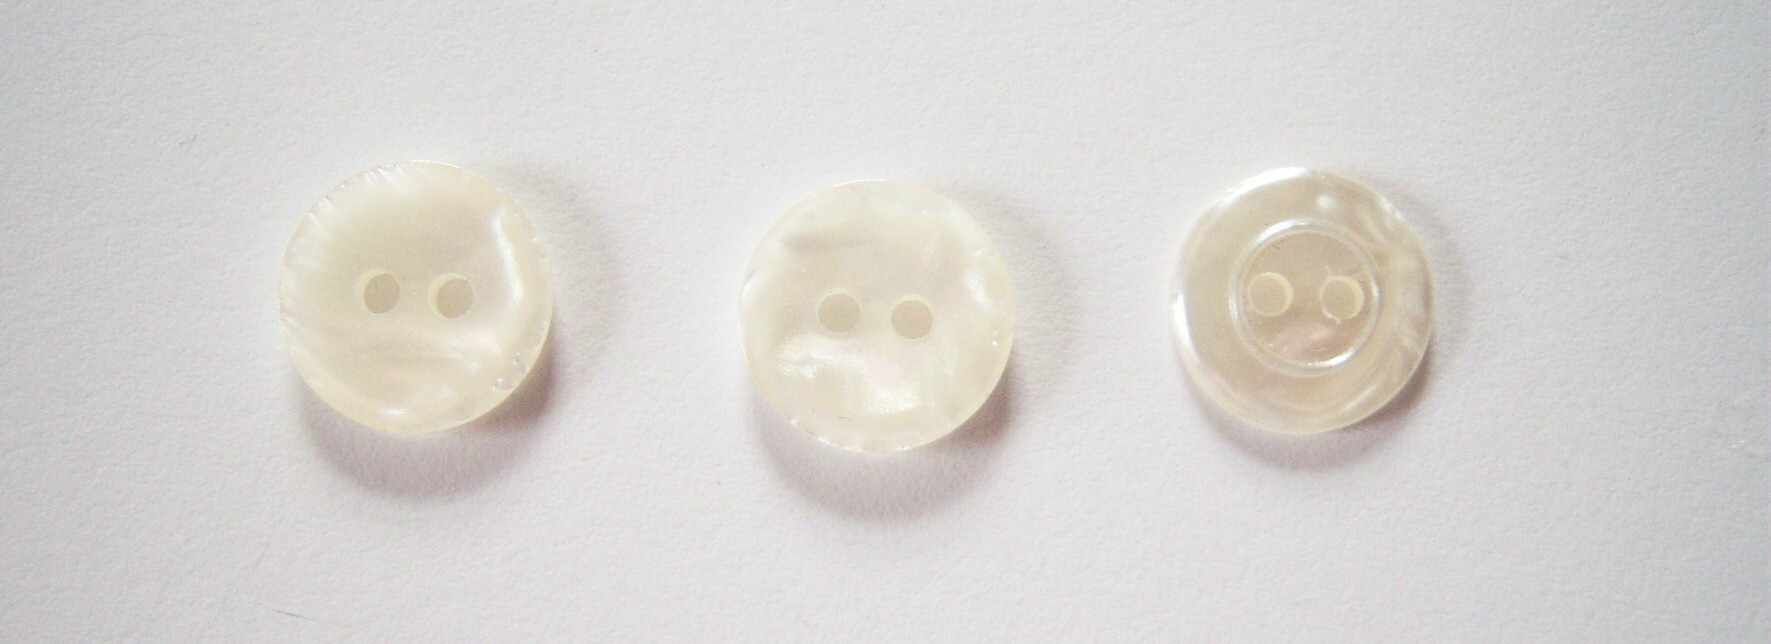 Off White 9/16" Pearlized Poly 2 Hole Button